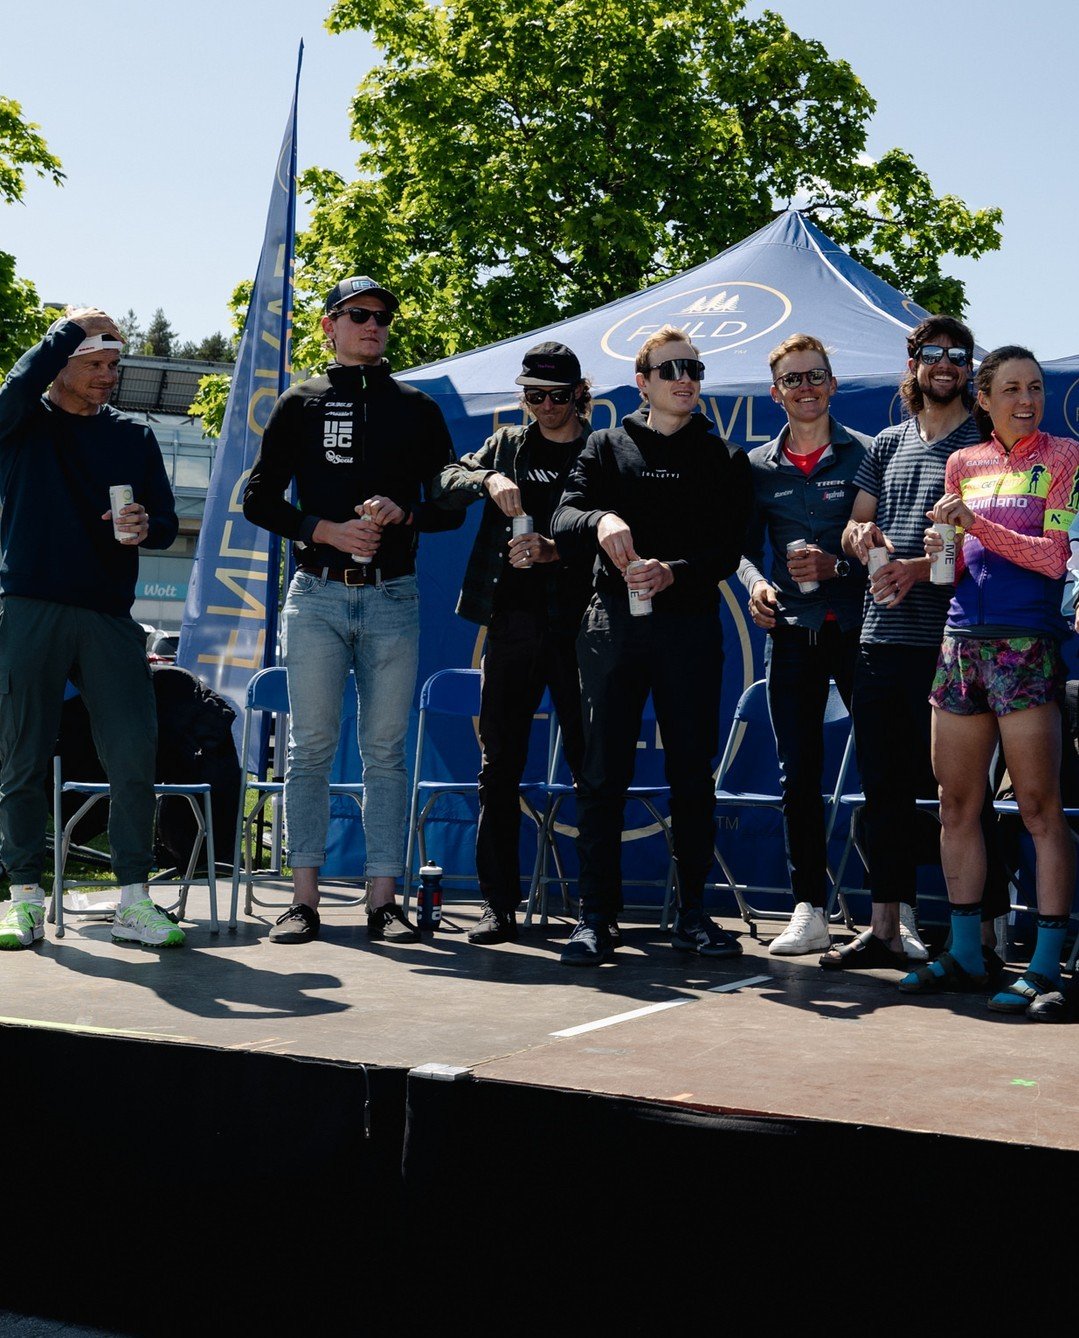 At our 2023 FNLD GRVL Pro Panel we tested the mind, body and spirit of our sport's top names to crown a champion for the sole purpose of audience entertainment. If you could invite one cycling celebrity to join us on stage in Lahti this year, who wou